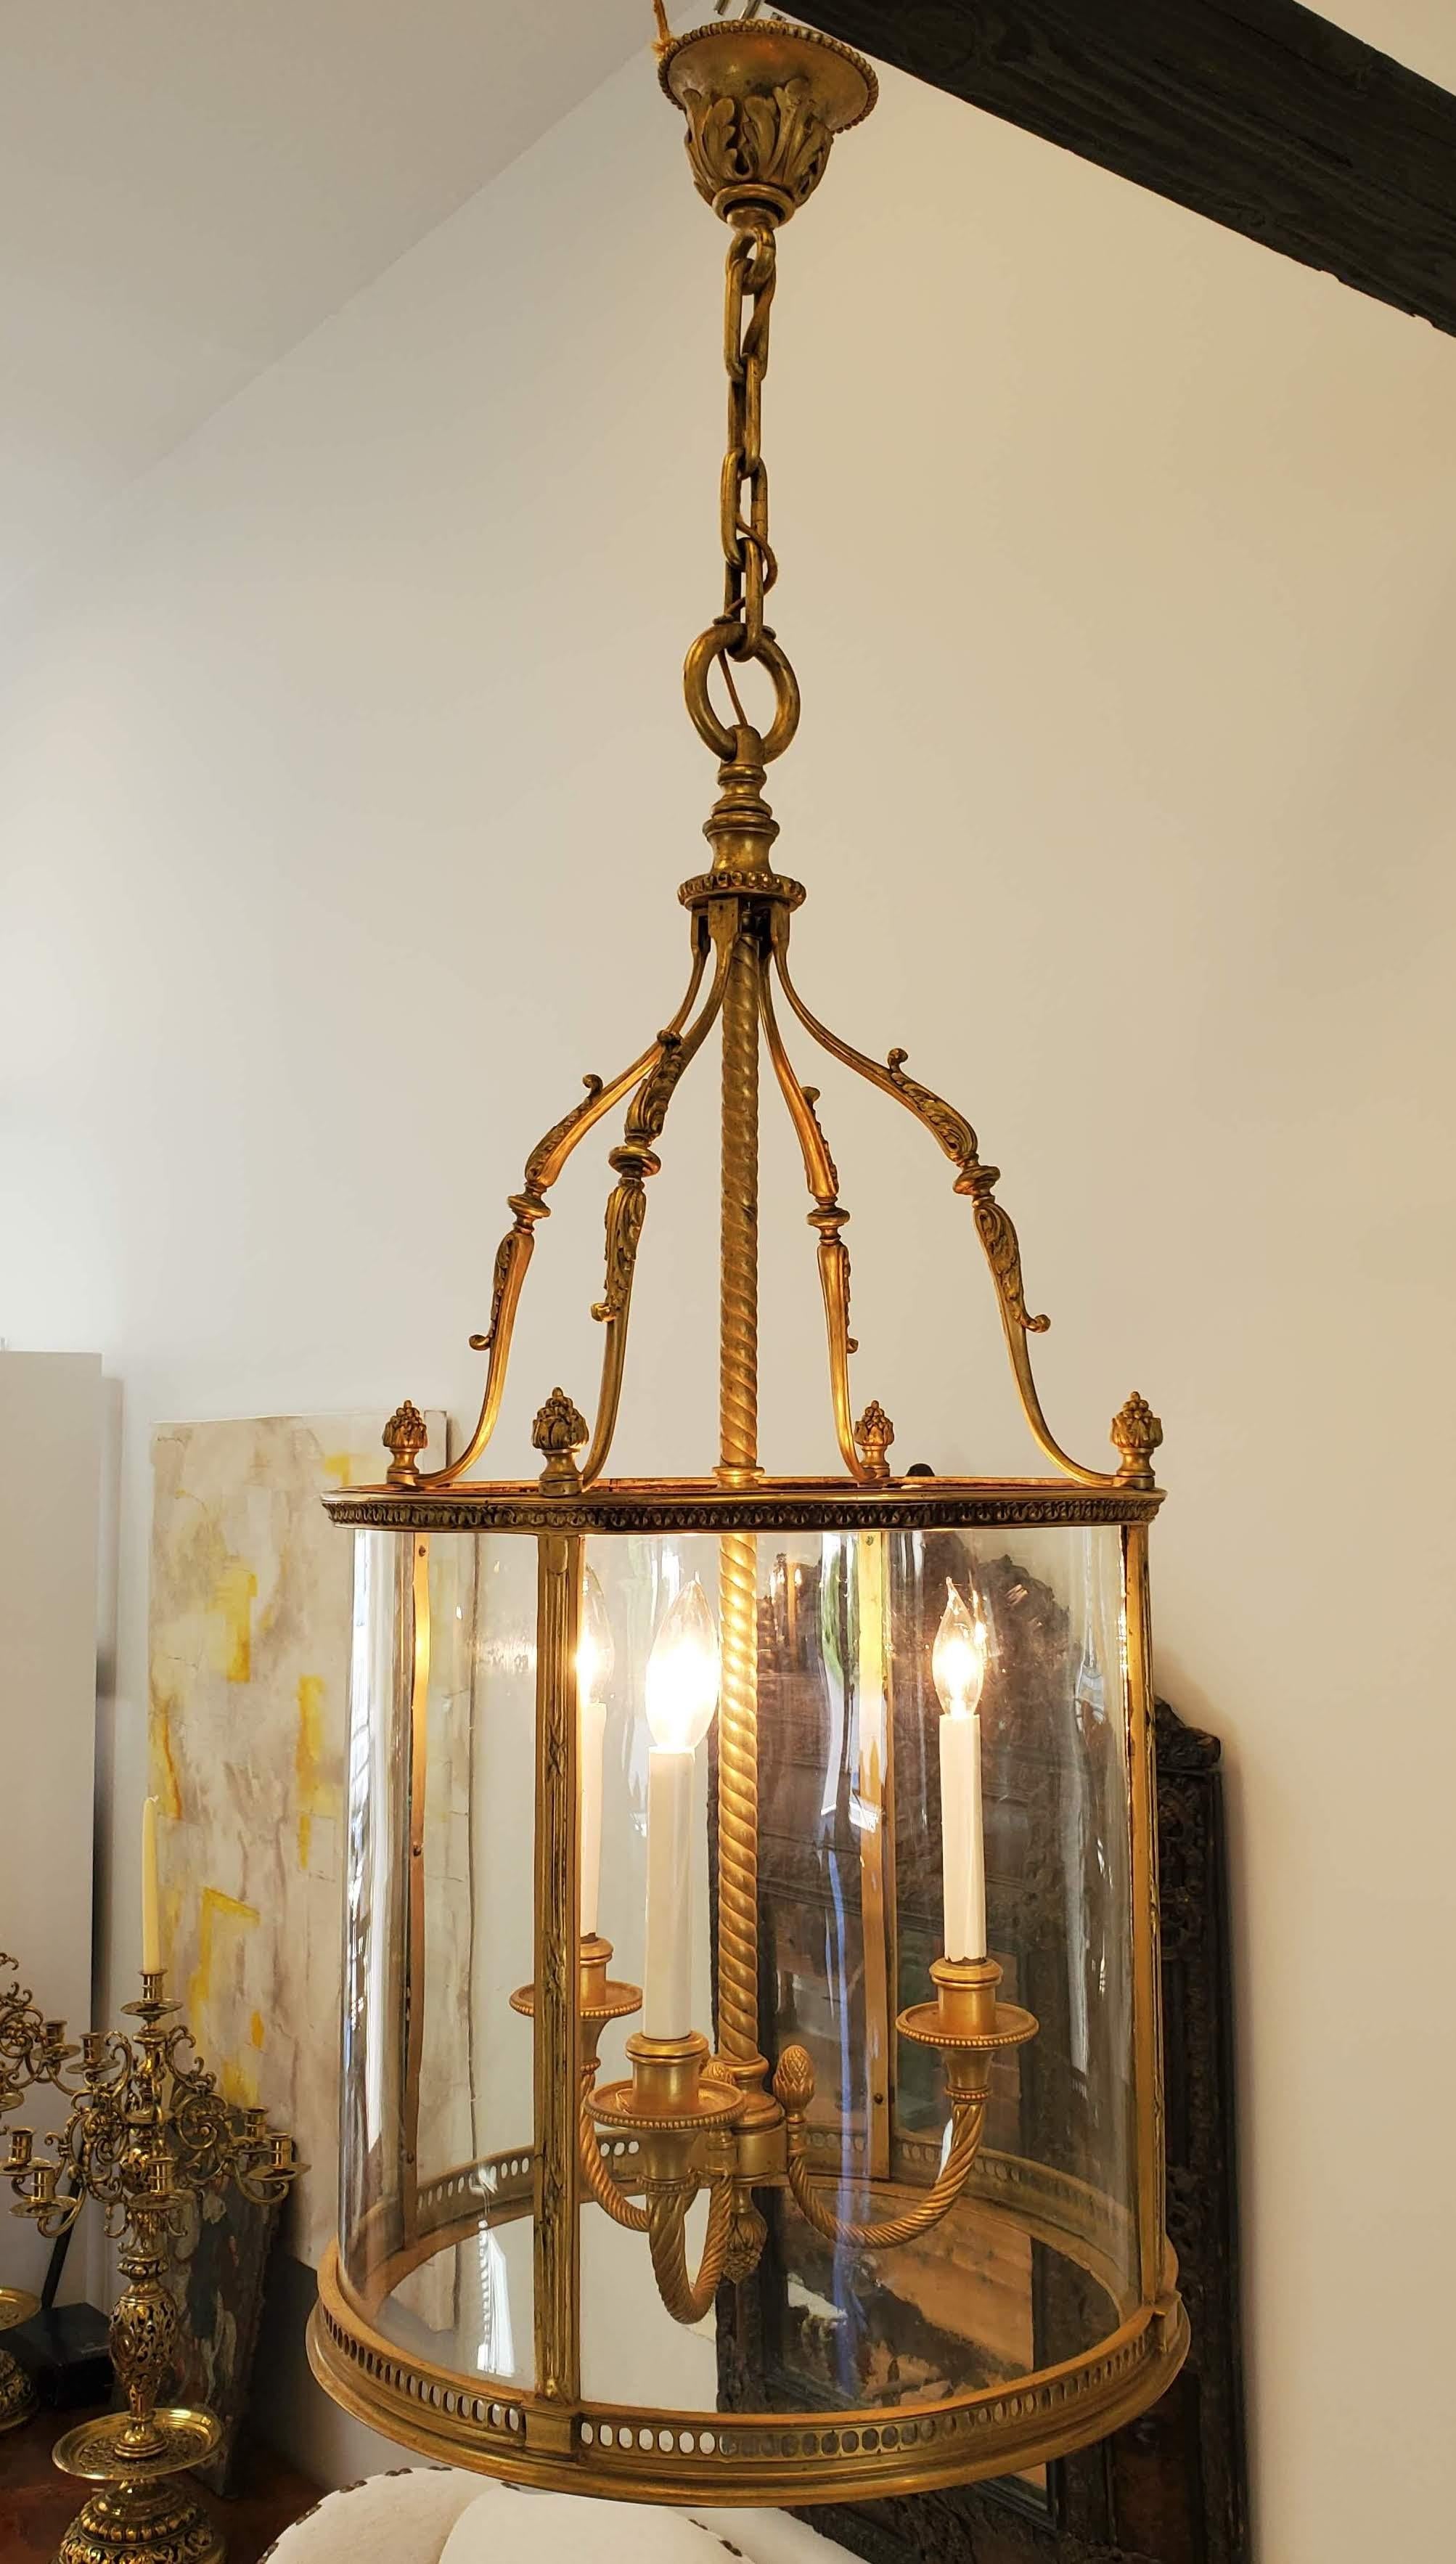 Fine quality Louis XVI style interior lantern adds the perfect touch of class to a hallway or entryway. Large proportions made of gilt bronze with neoclassical architectural details and curved glass panes.
France, circa 1940.
Measures: 44